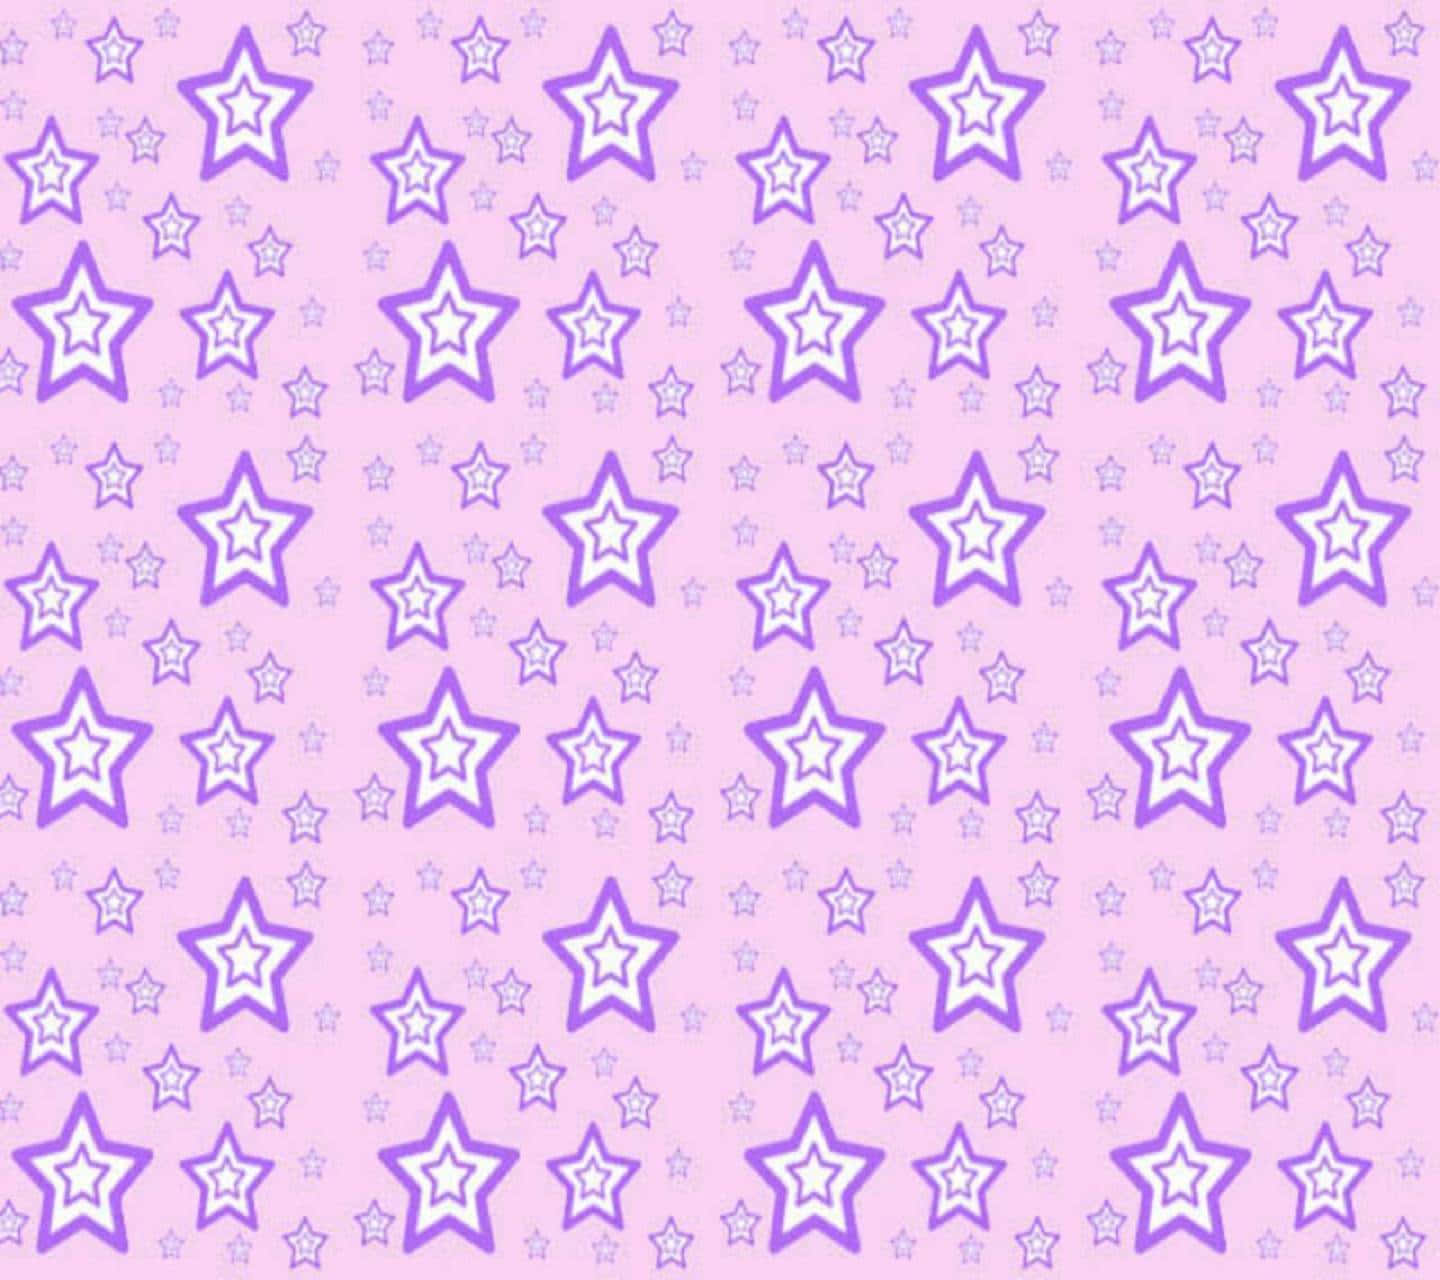 Download a pink and white star pattern | Wallpapers.com